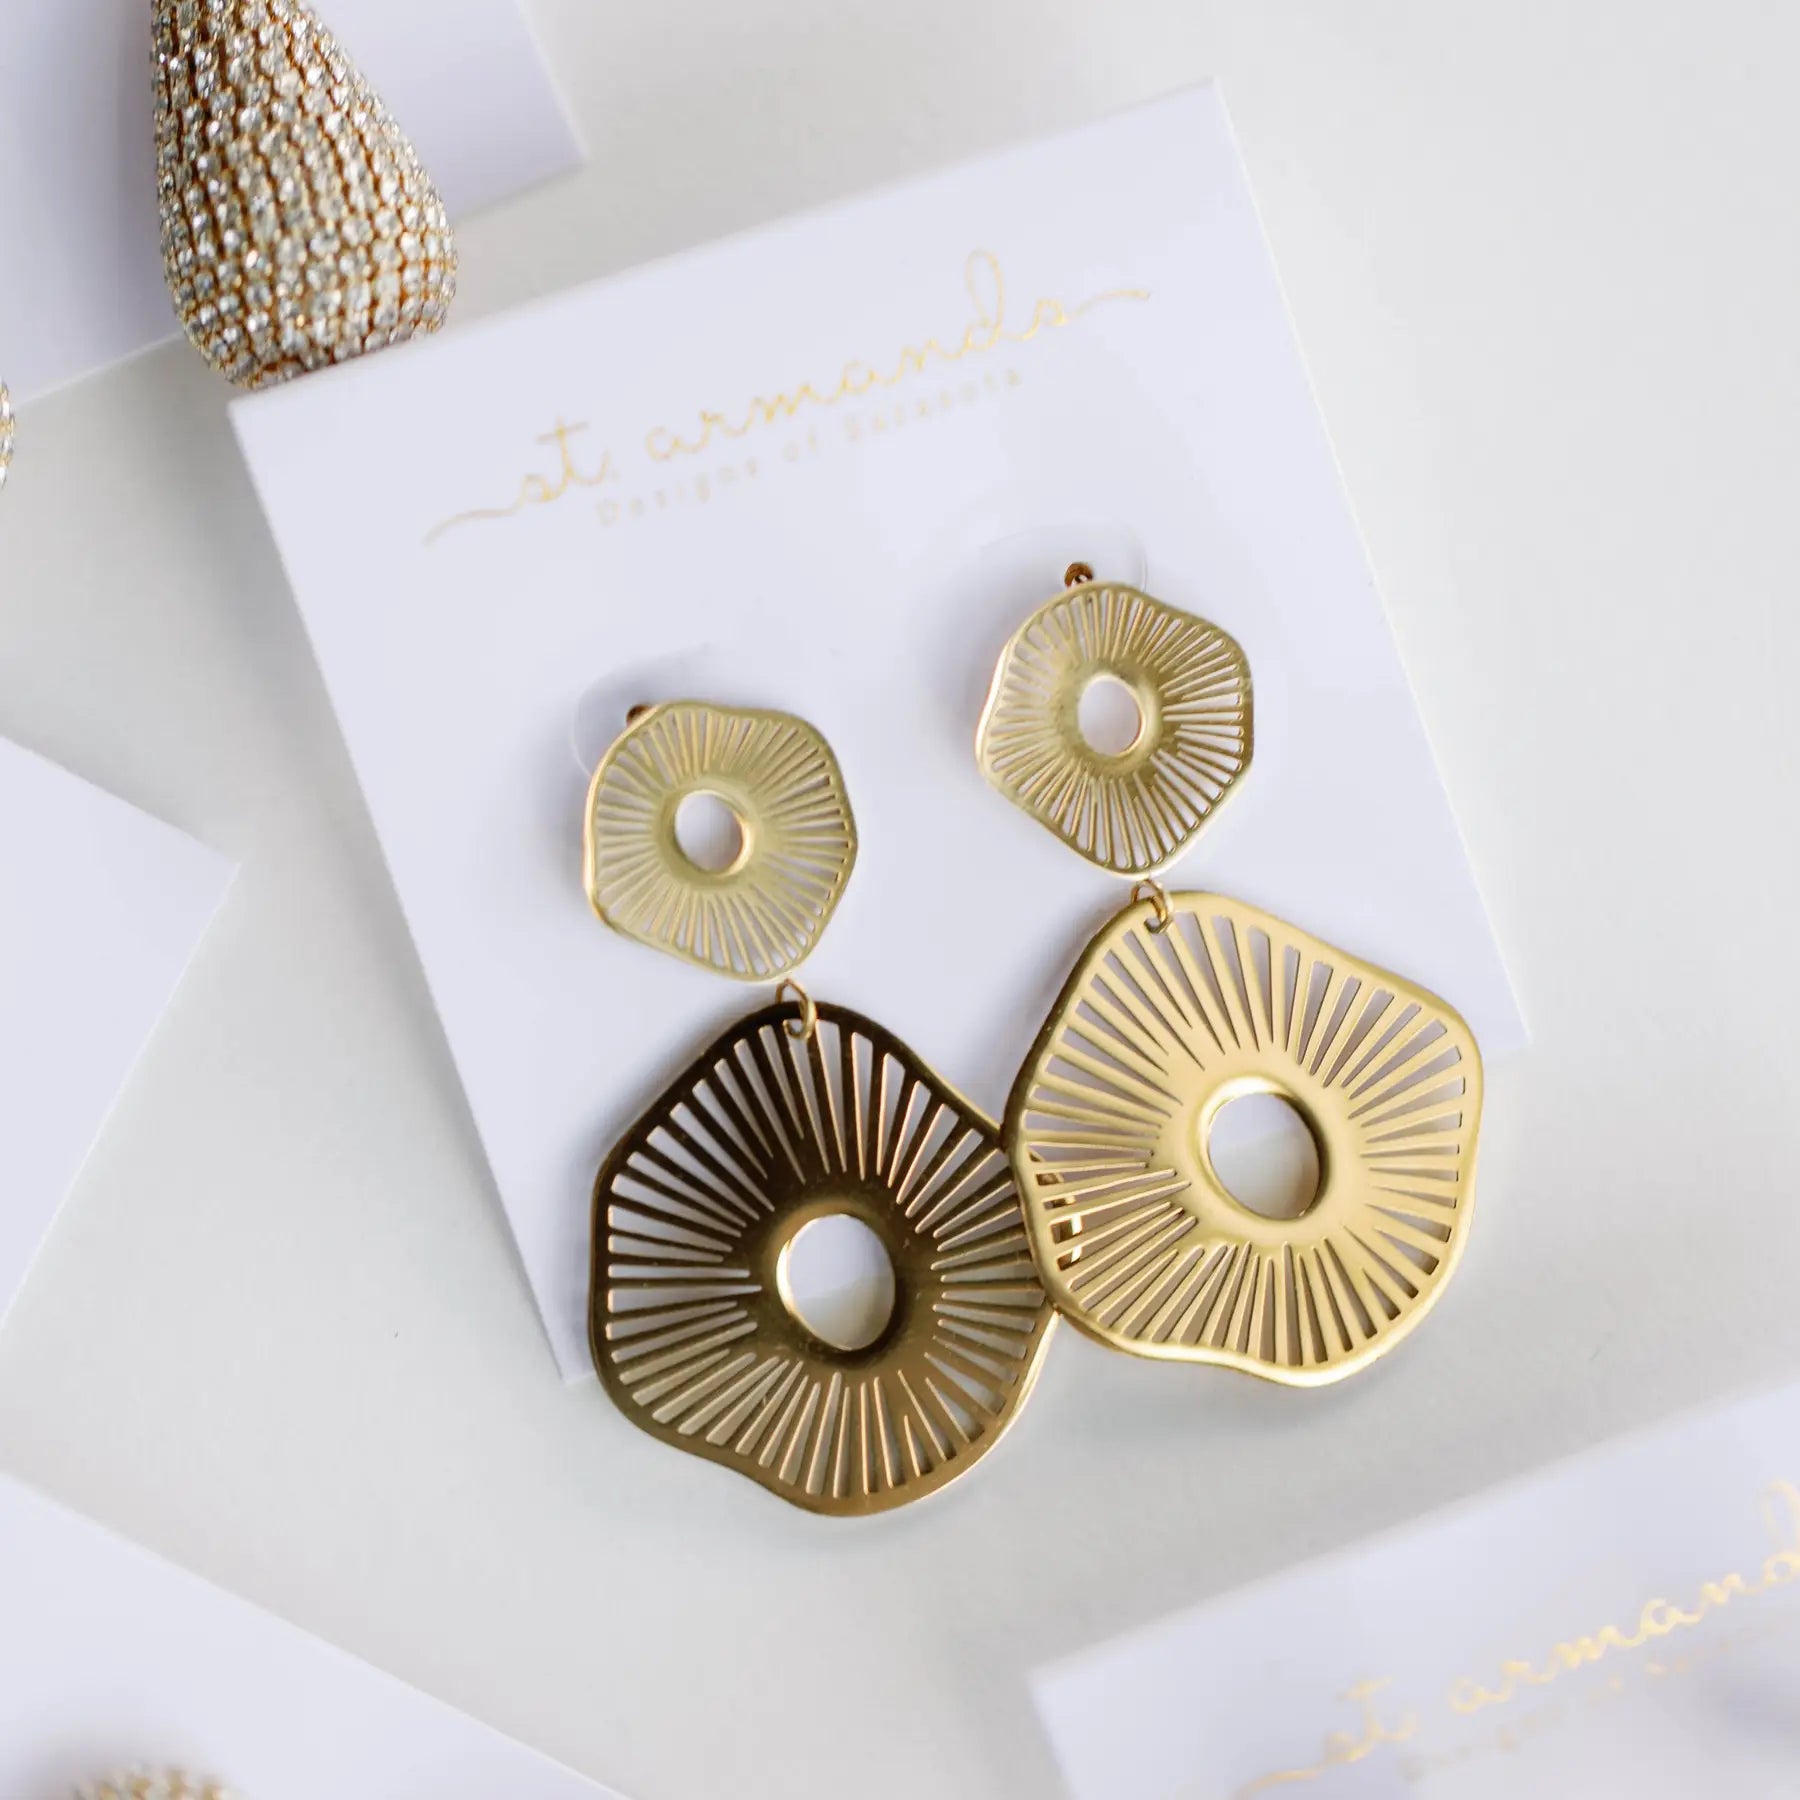 Gold Anemone Statement Earrings-110 Jewelry & Hair-St Armands Designs of Sarasota-July & June Women's Fashion Boutique Located in San Antonio, Texas